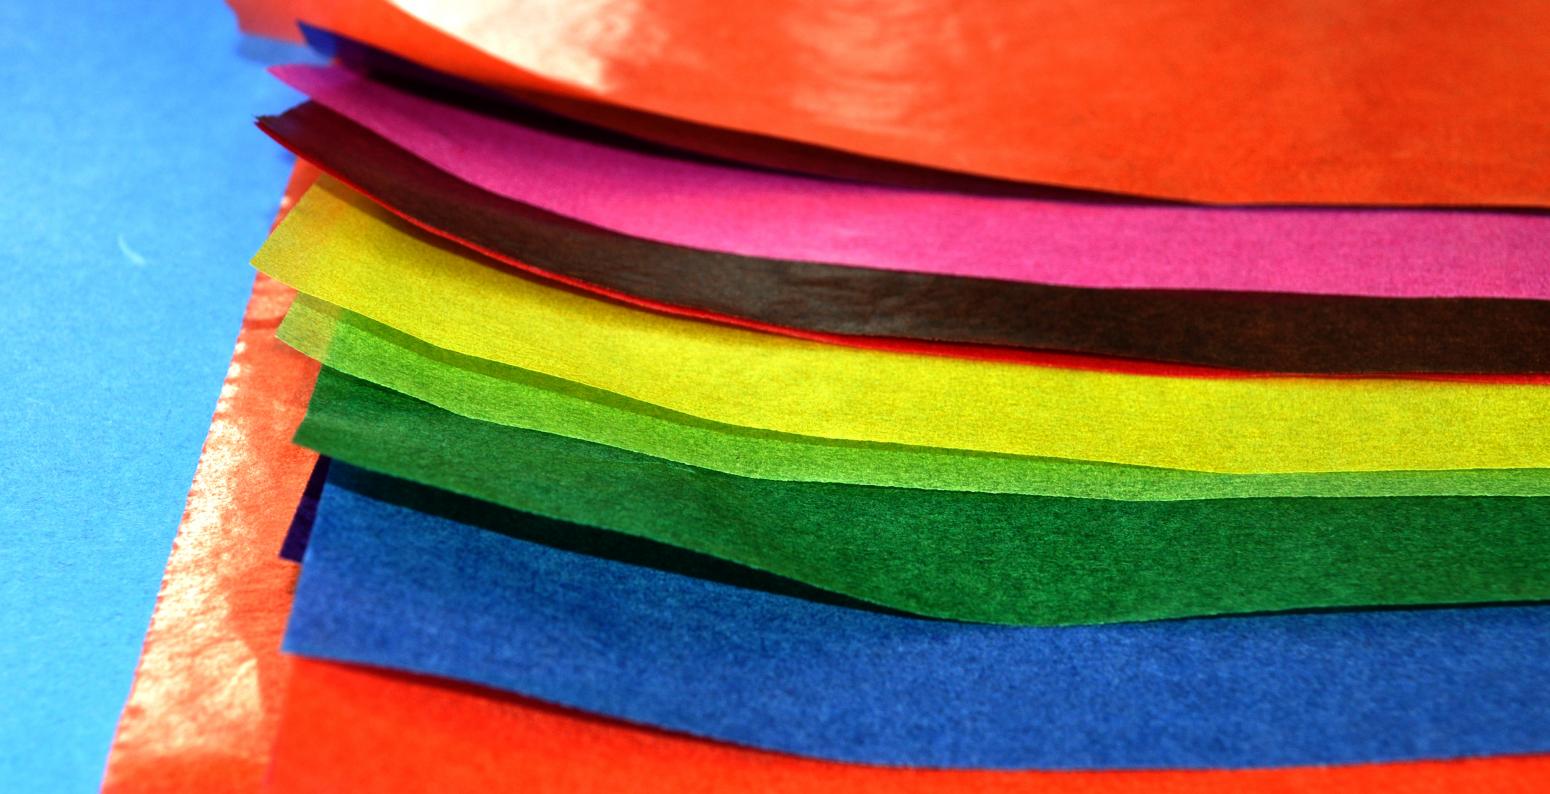 A stack of colorful, waxy Folia Transparent papers.